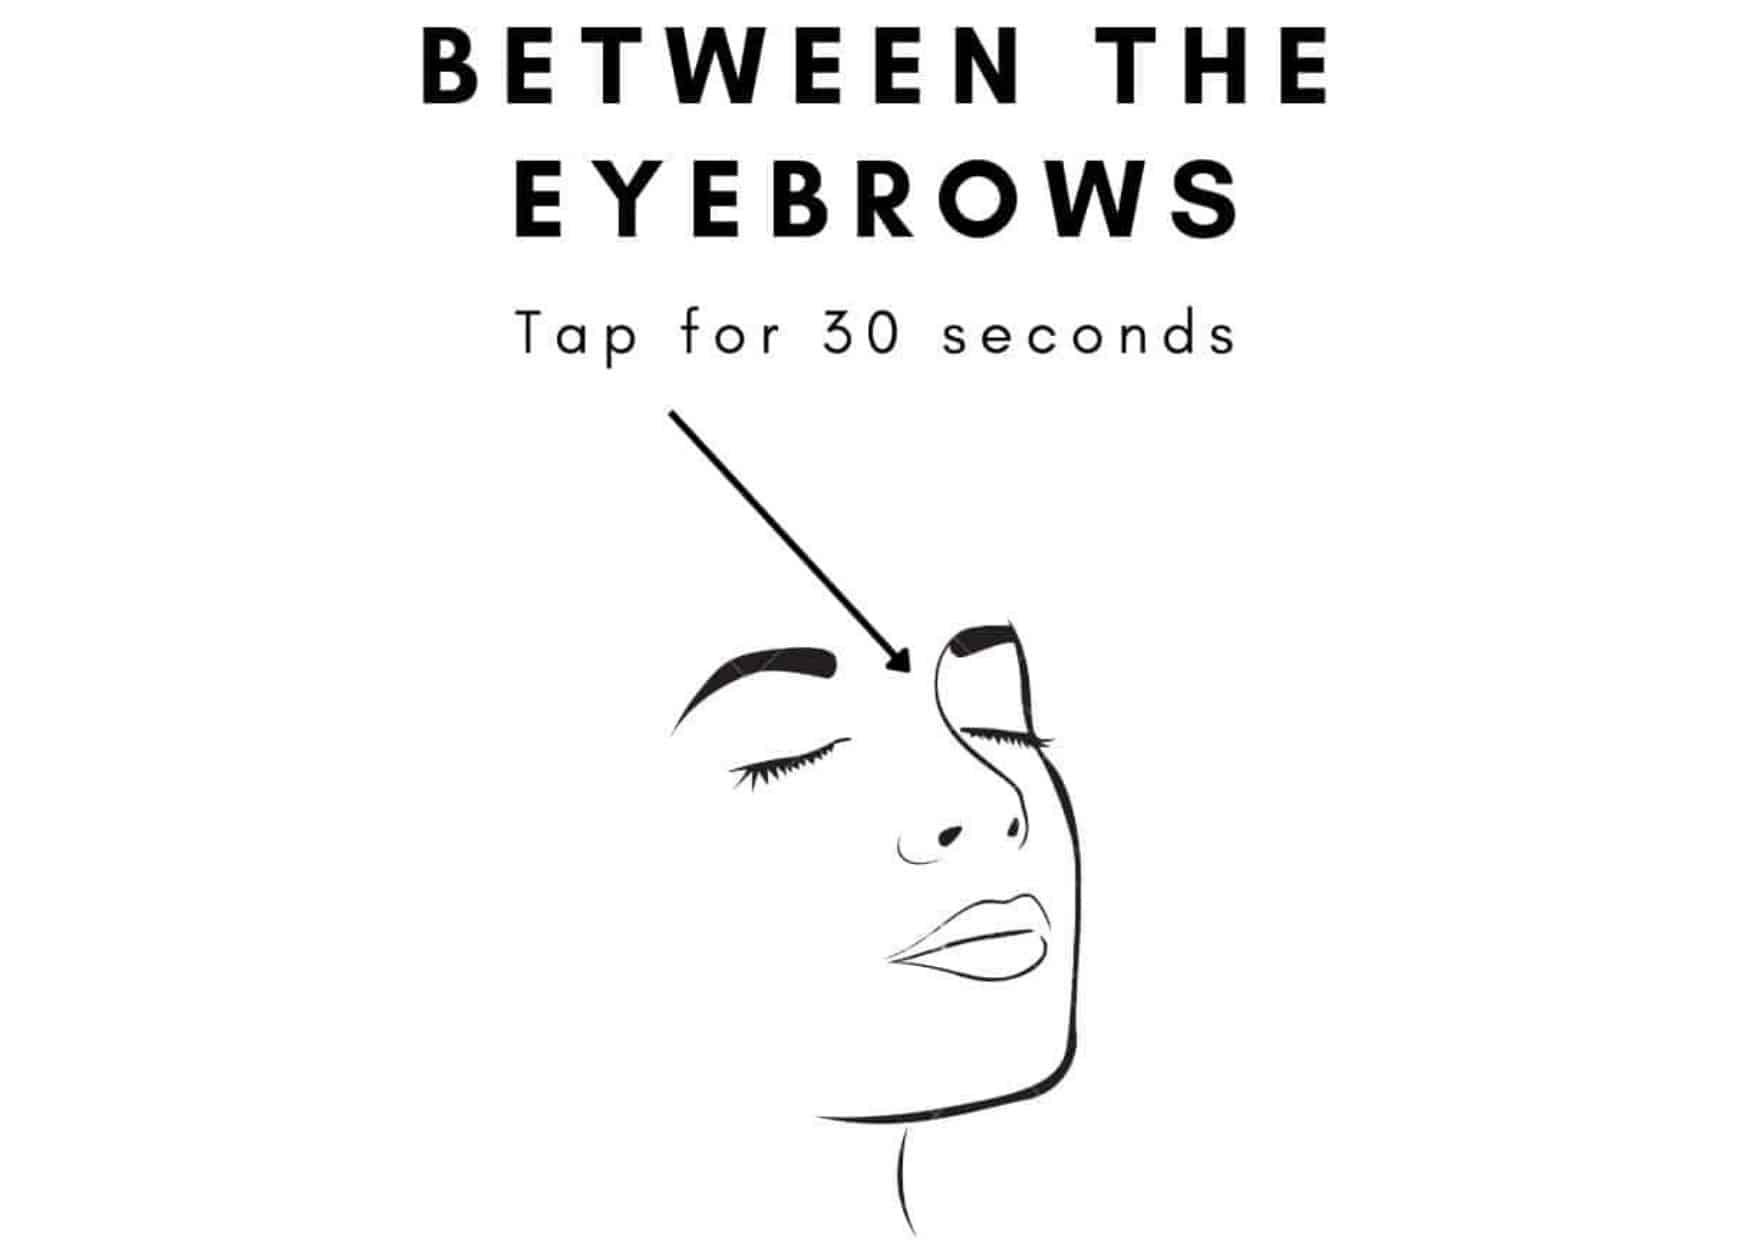 tapping between the eyebrows